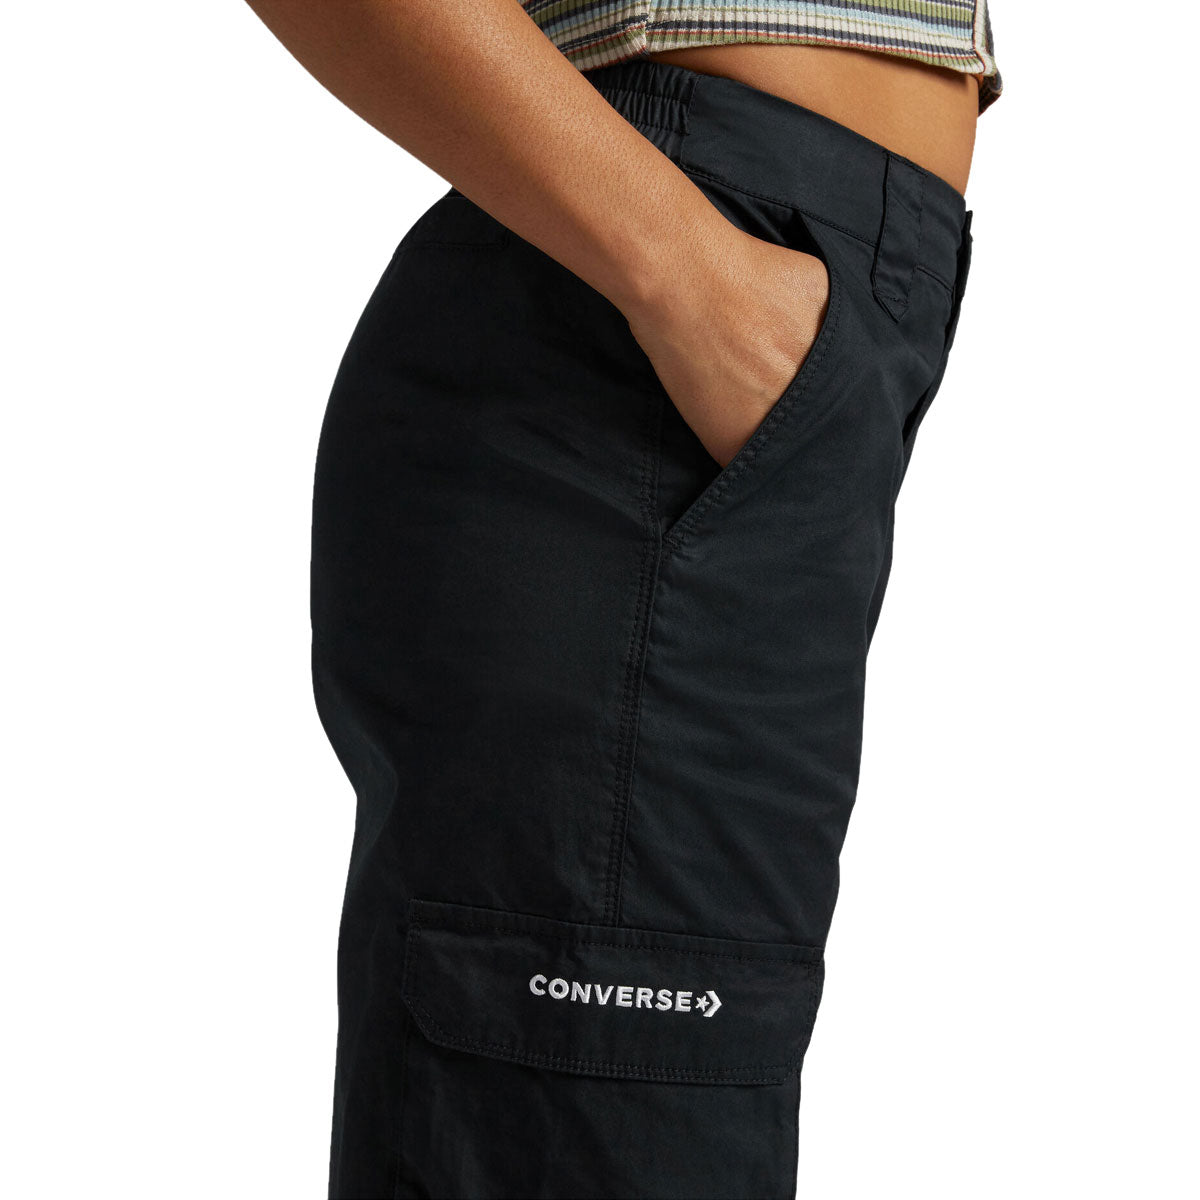 Converse Relaxed Cargo Pants - Black image 4